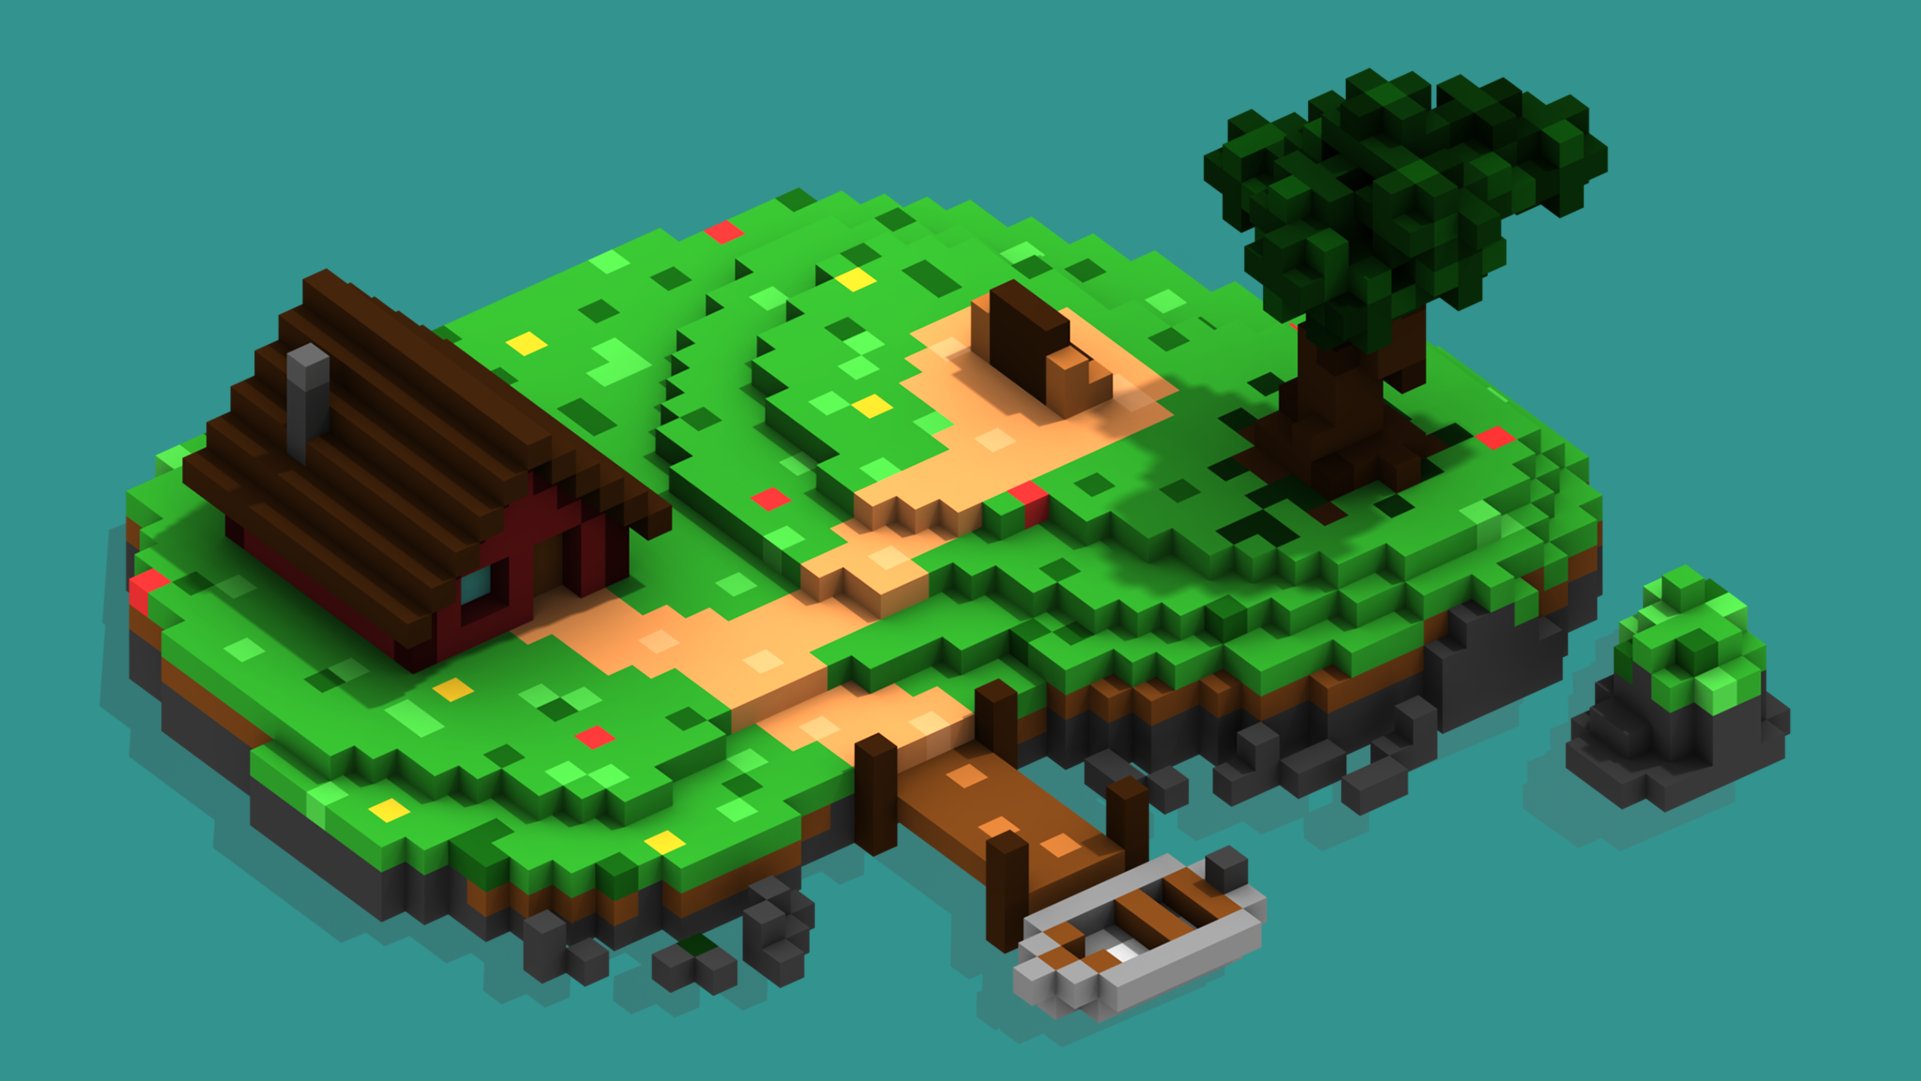 Voxel 4K wallpaper for your desktop or mobile screen free and easy to download